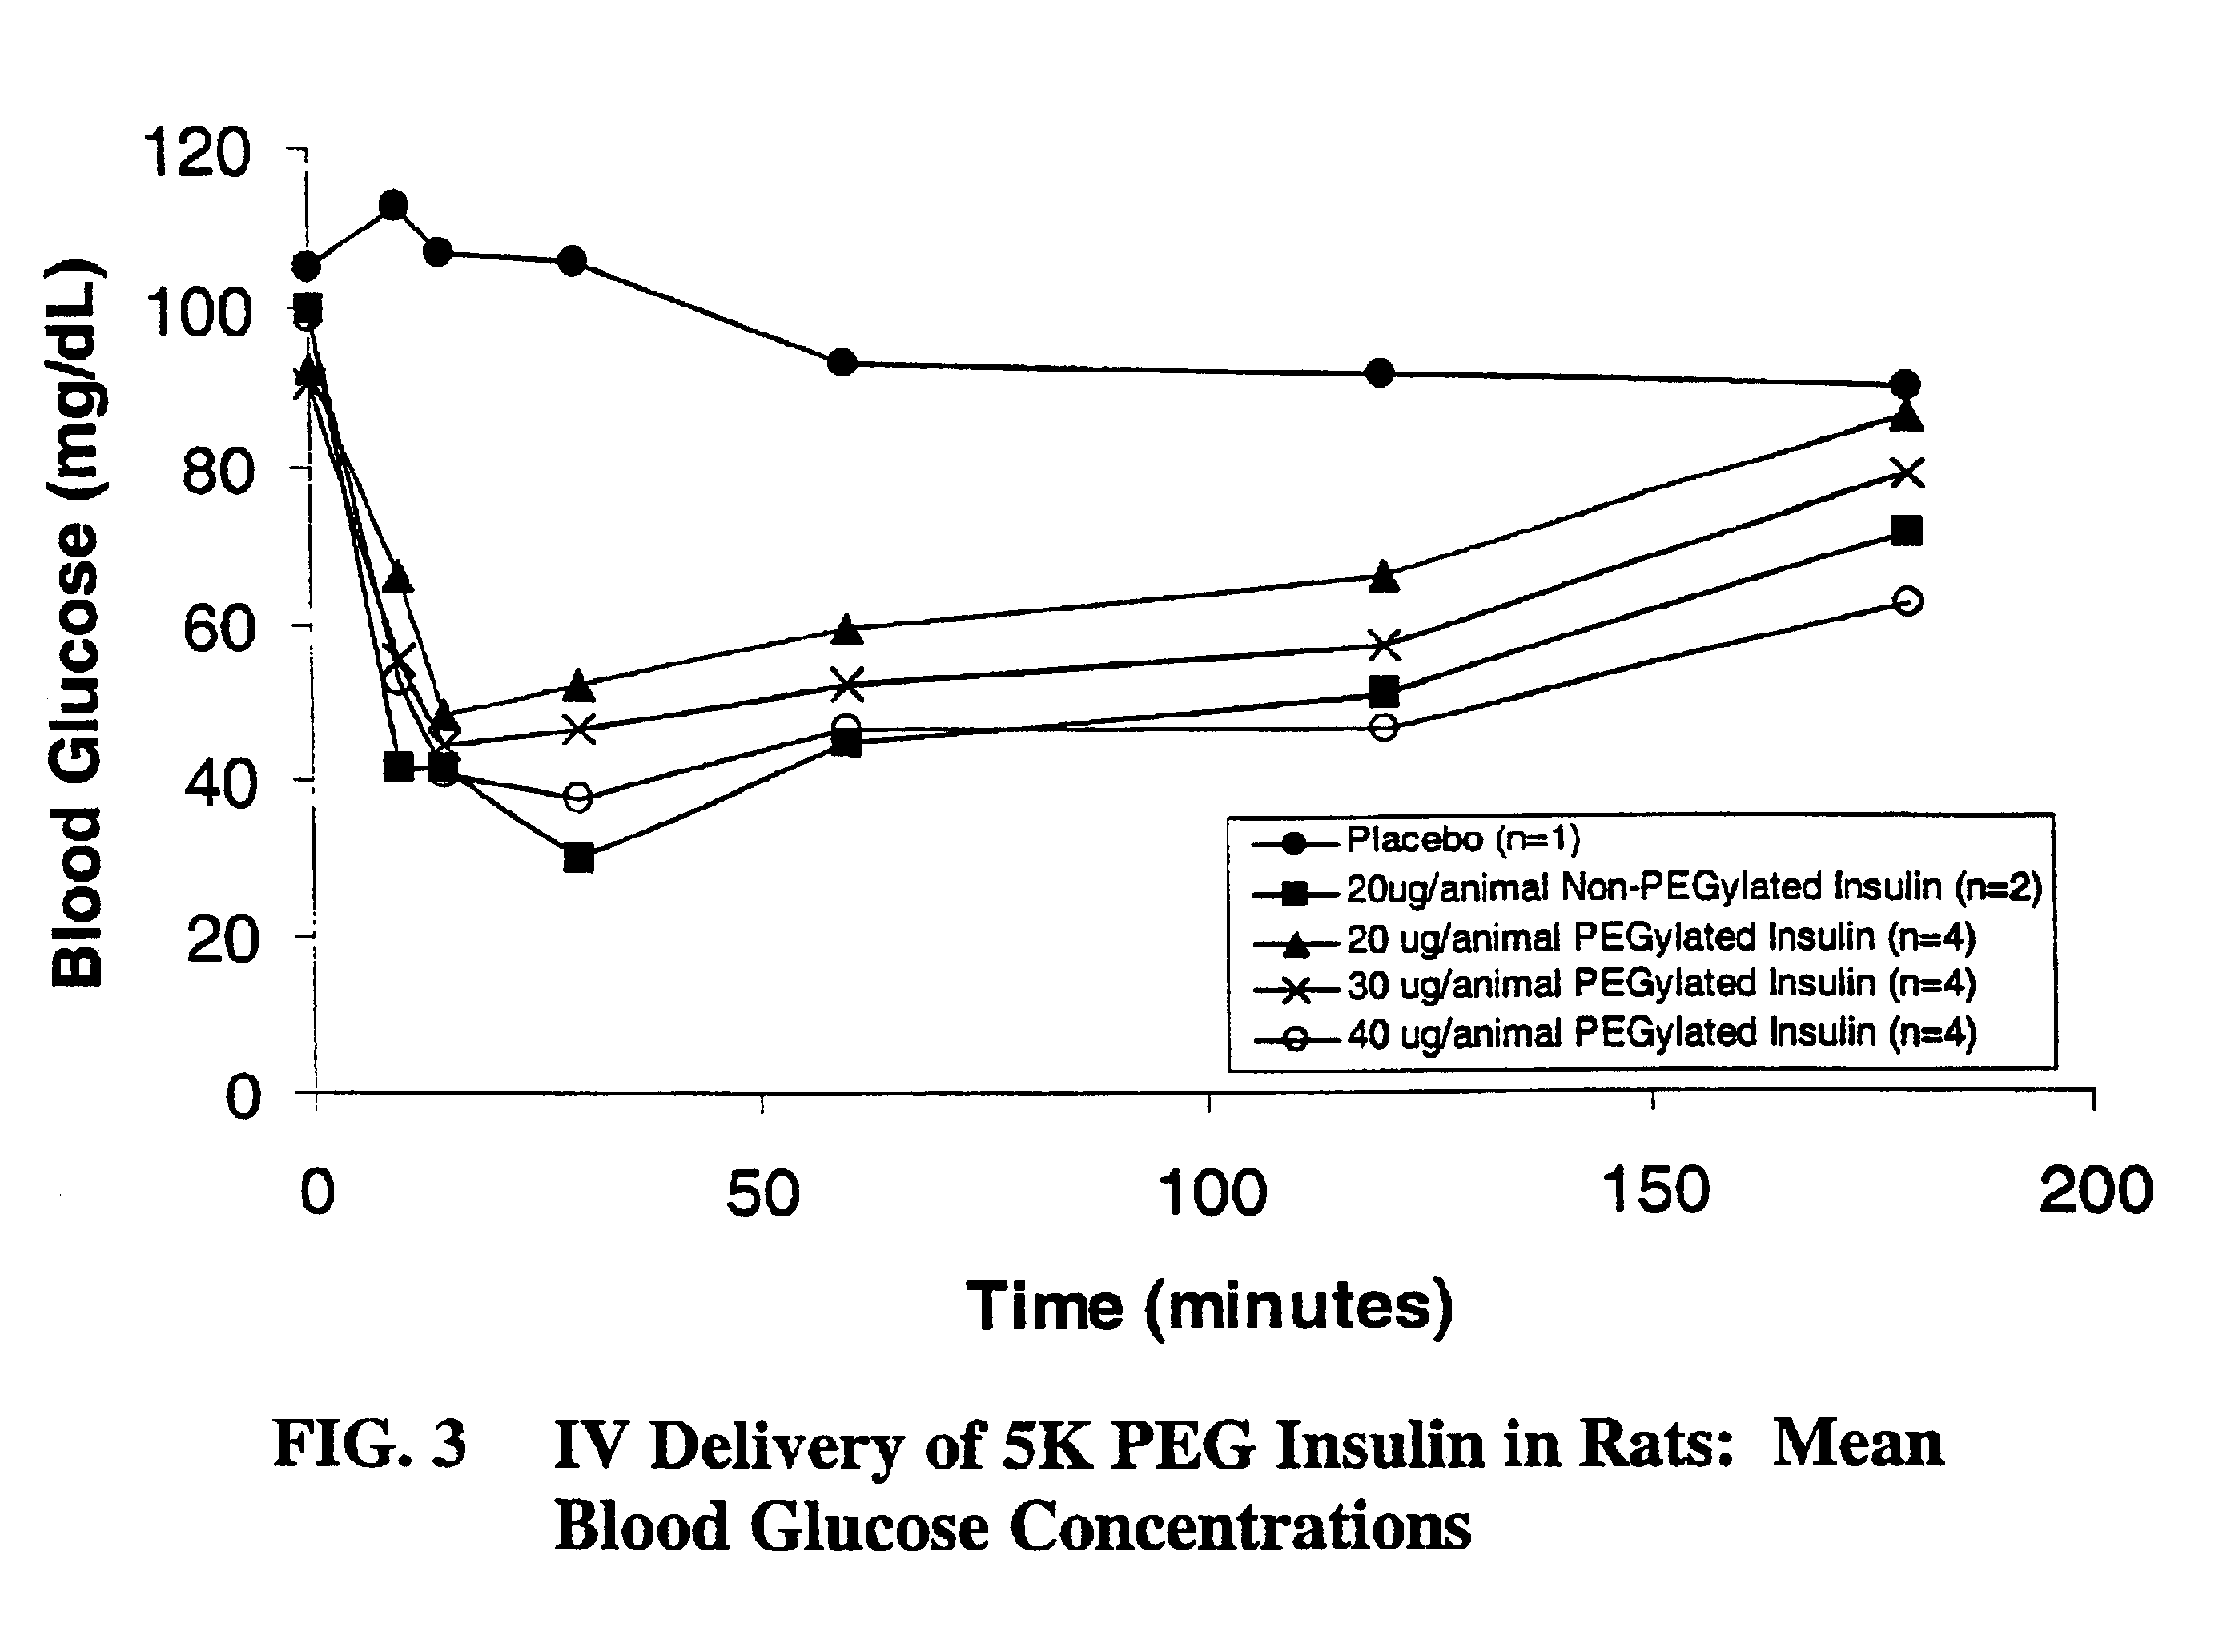 Pulmonary administration of chemically modified insulin